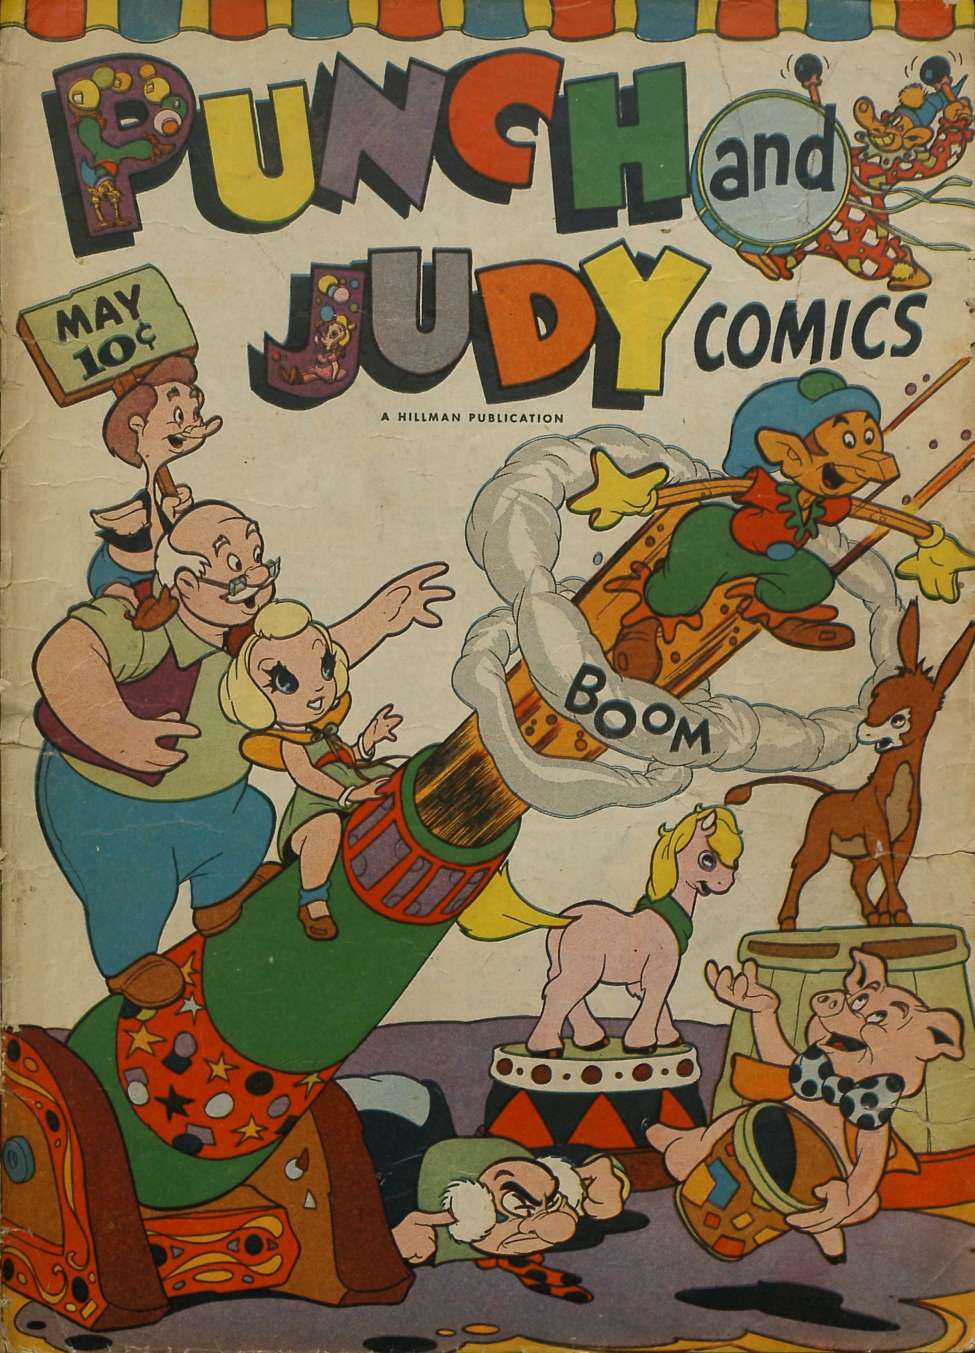 Book Cover For Punch and Judy v1 10 - Version 2